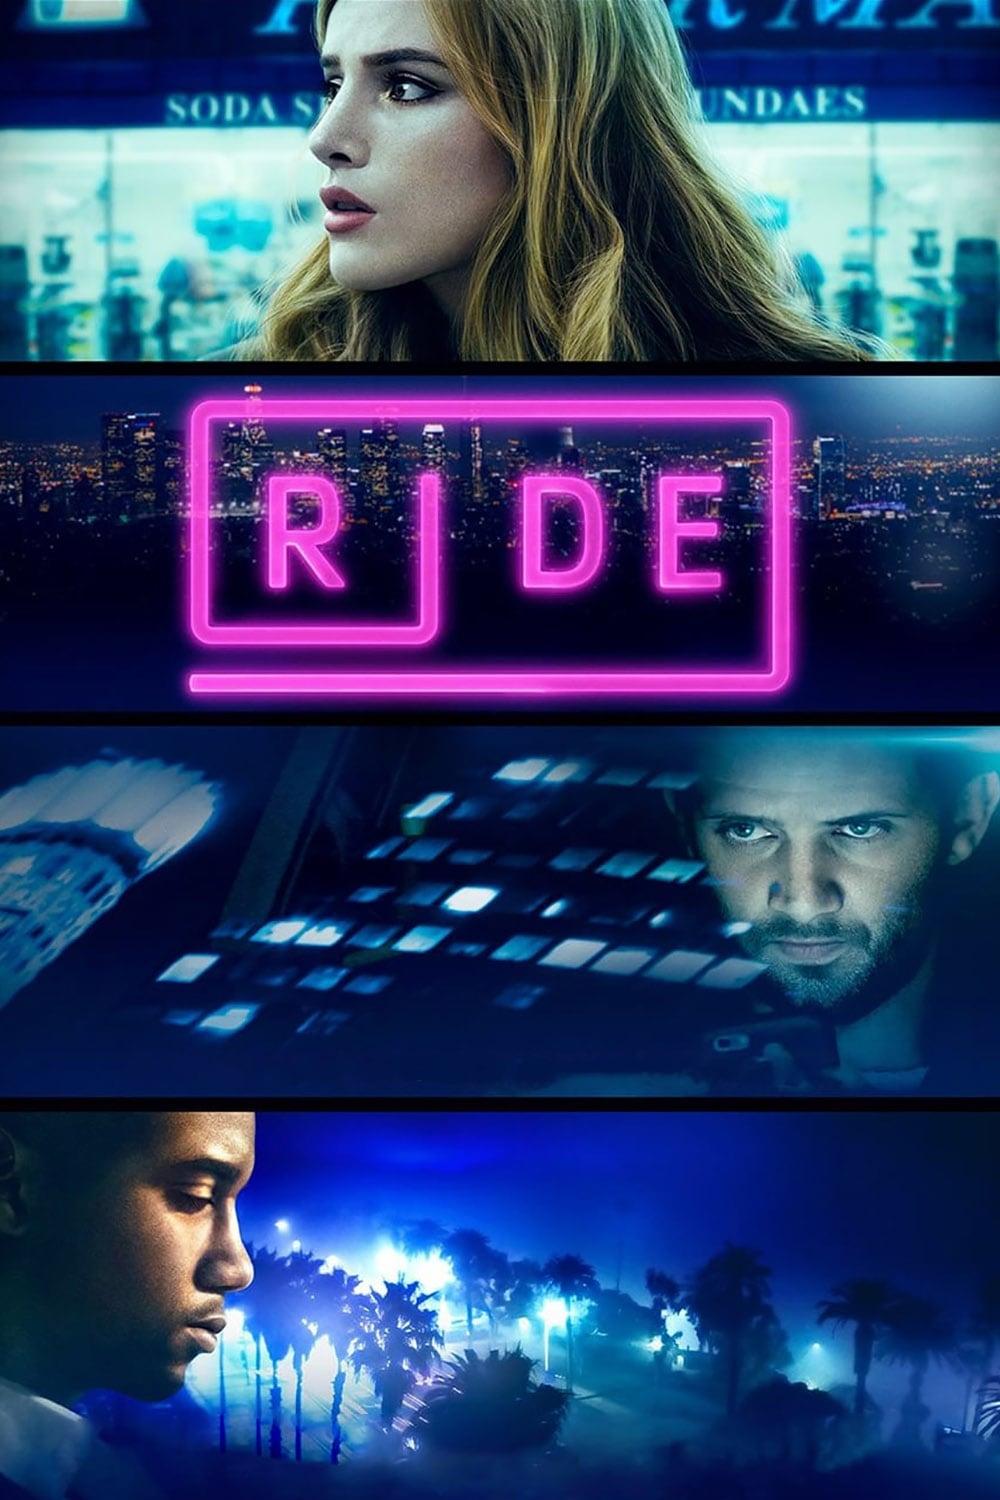 Ride poster